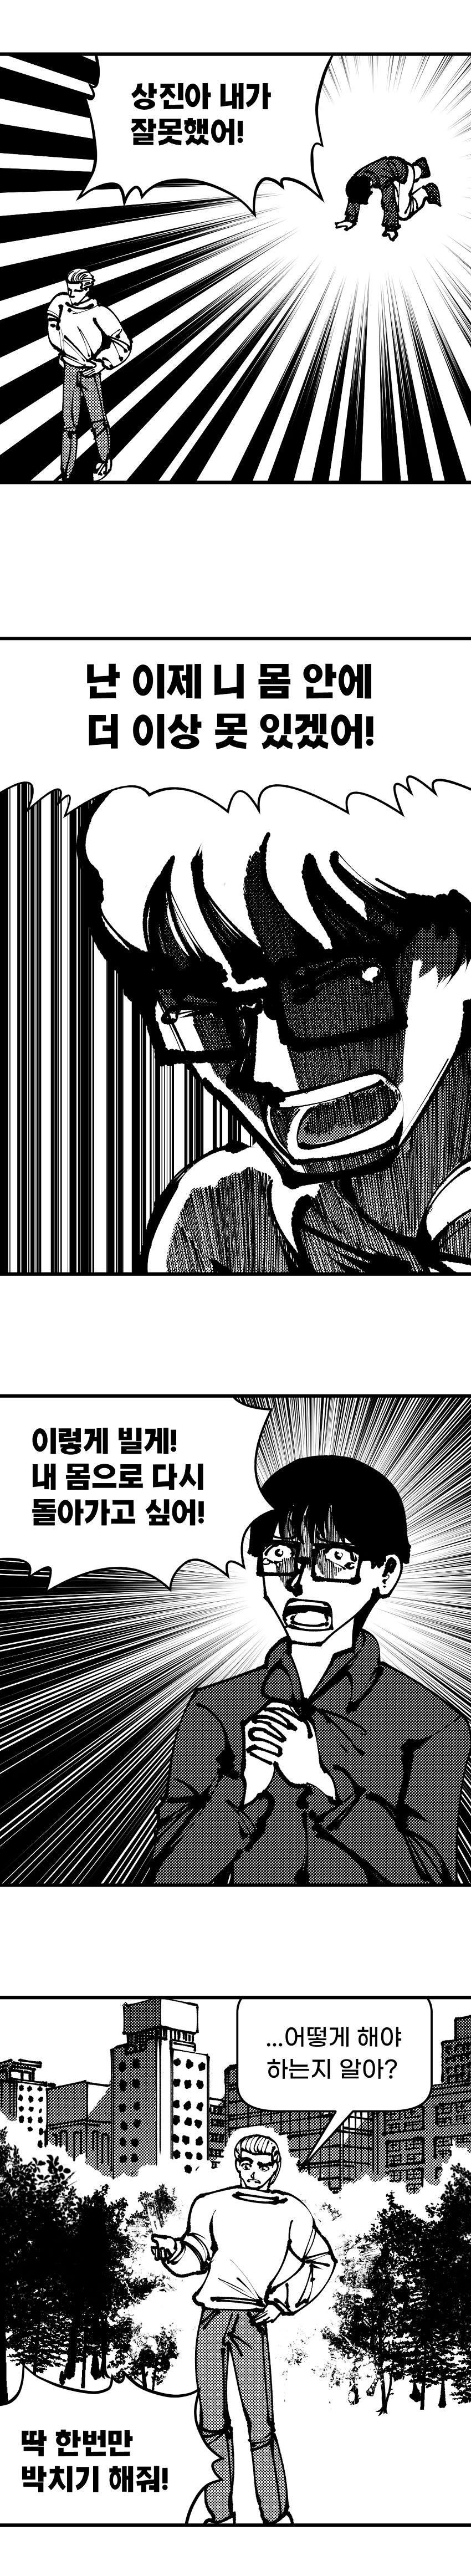 24post.co.kr_020.png